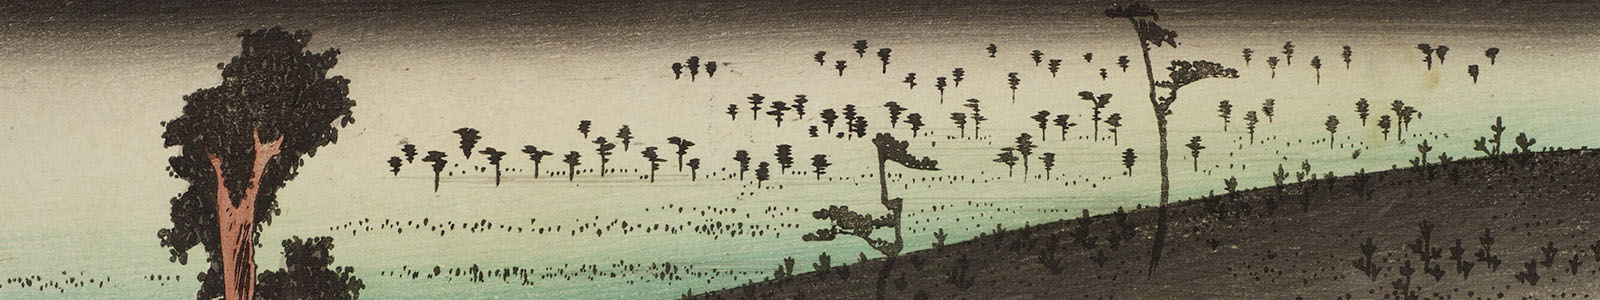 Landscapes of Japan: Woodblock Prints from Edo to Post-War